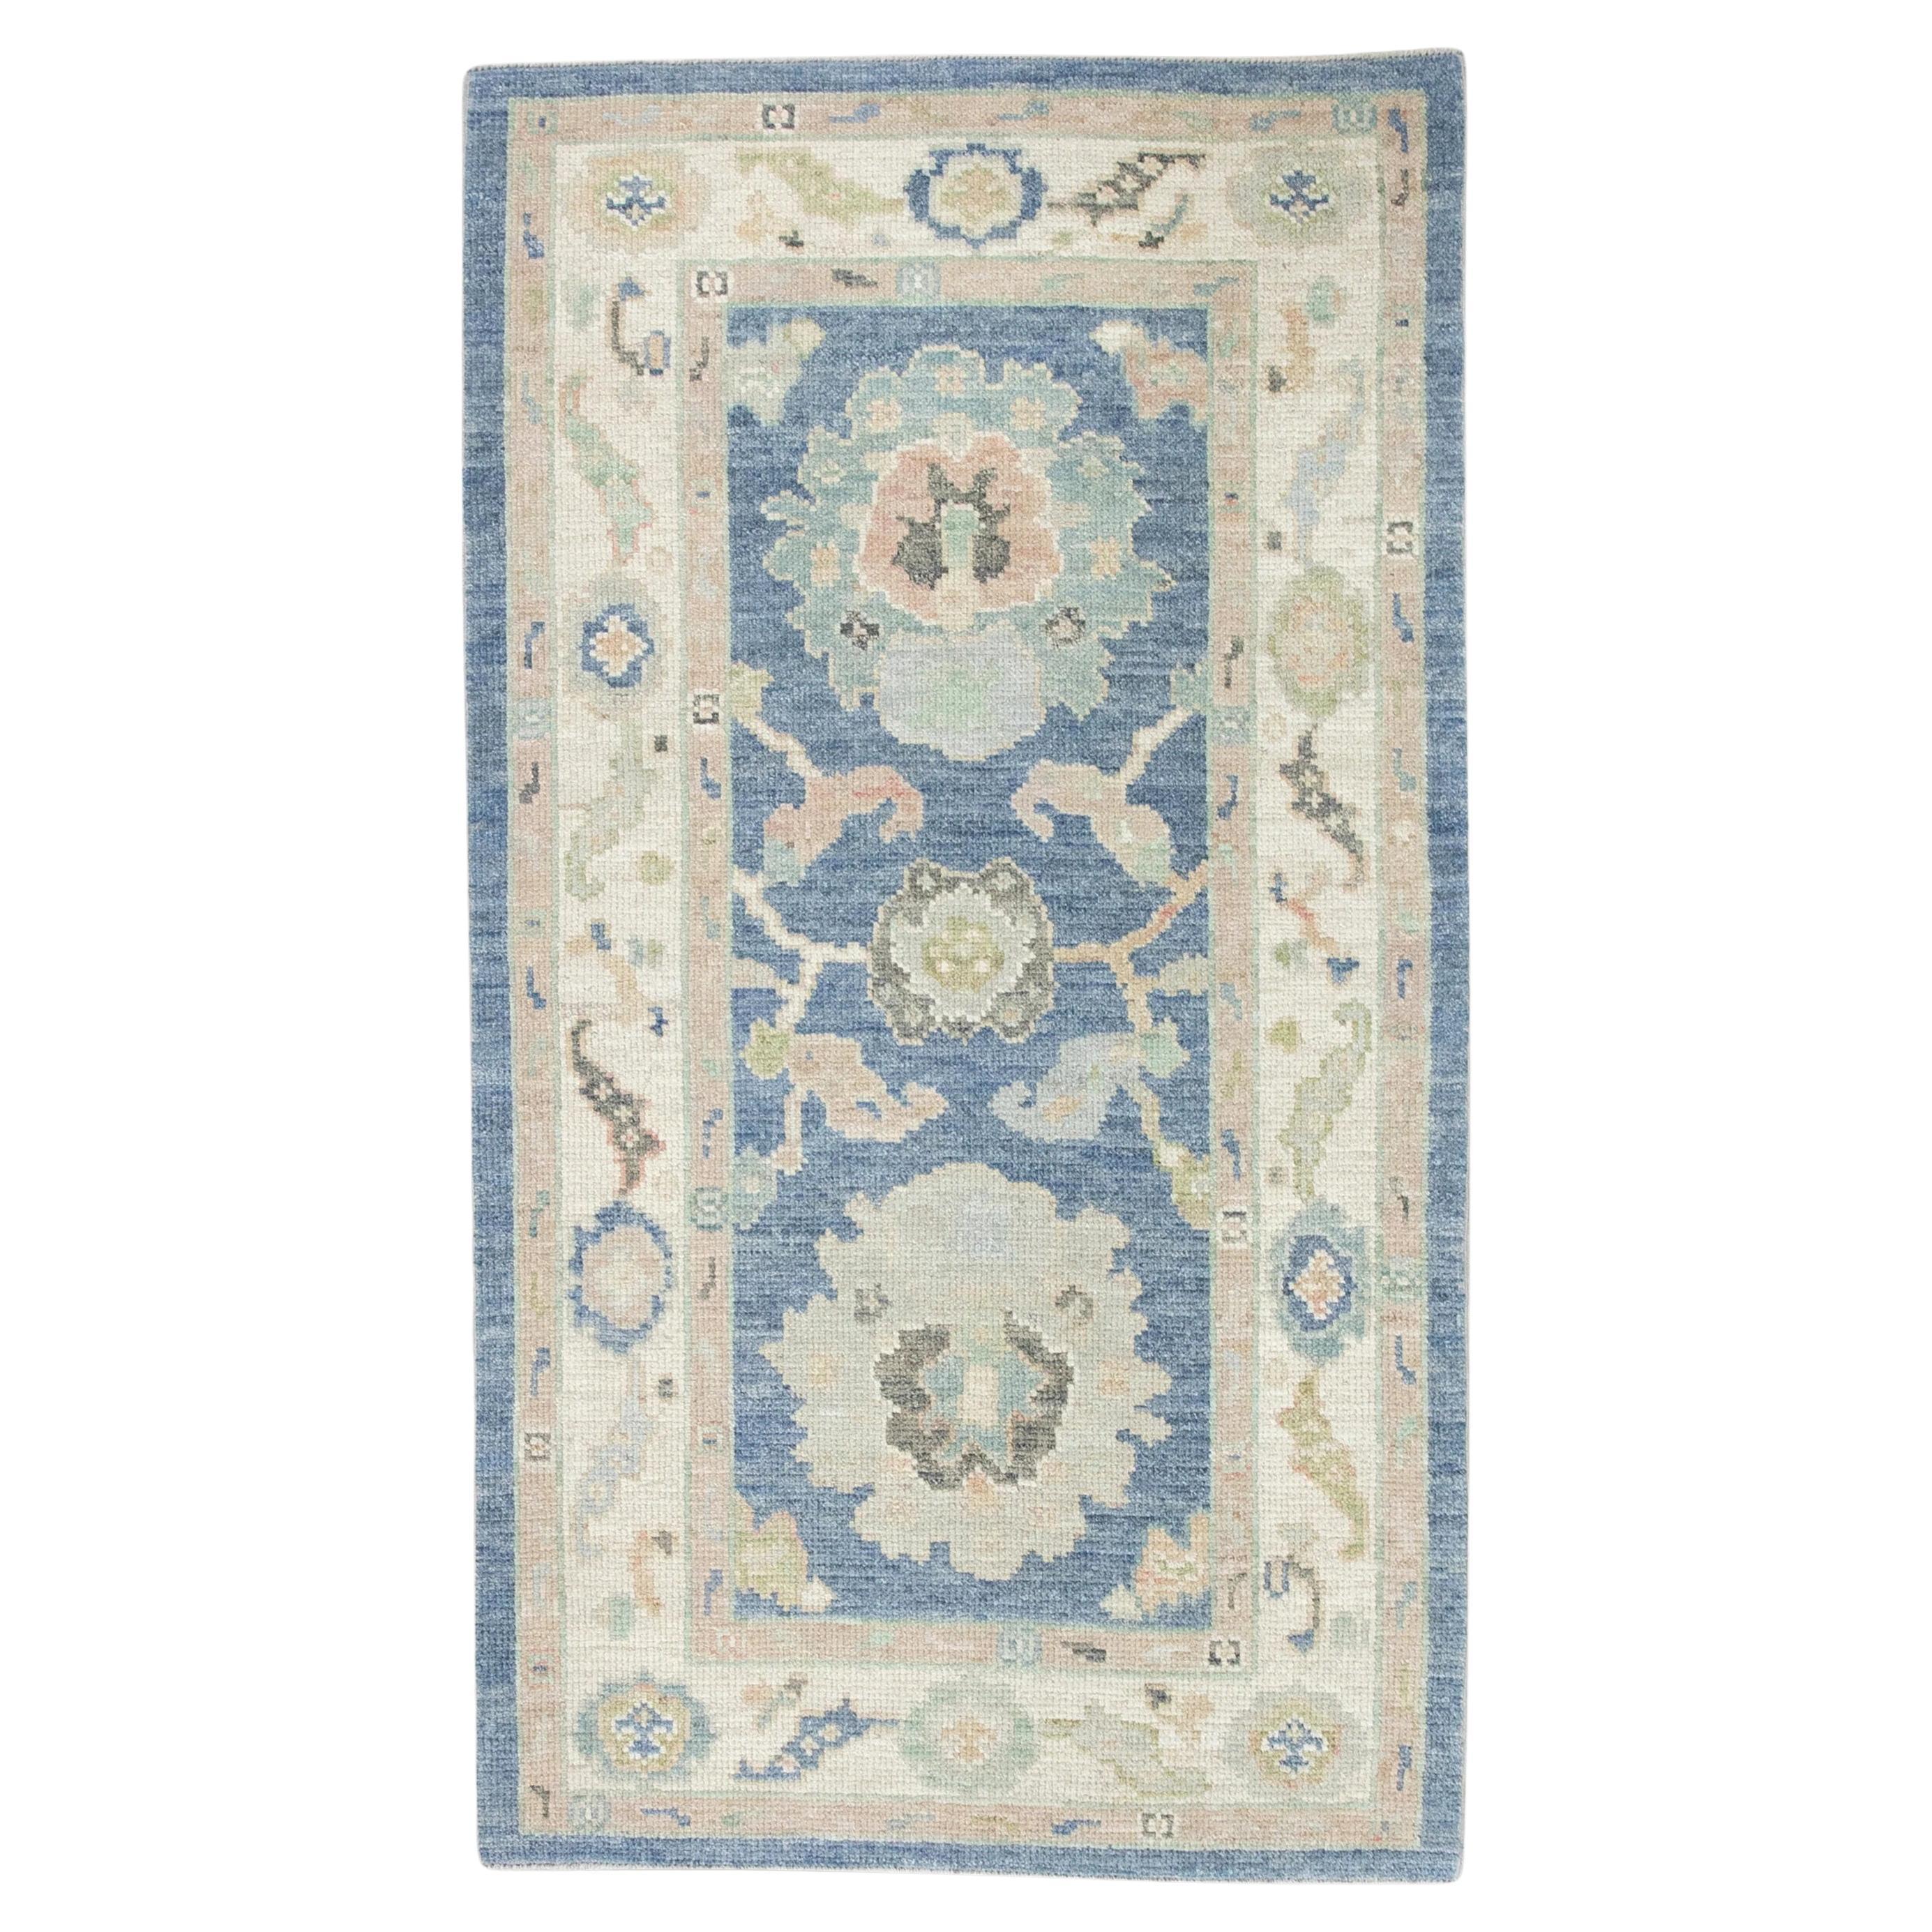 Blue and Pink Floral Handwoven Wool Turkish Oushak Rug 2'10" x 5'3" For Sale